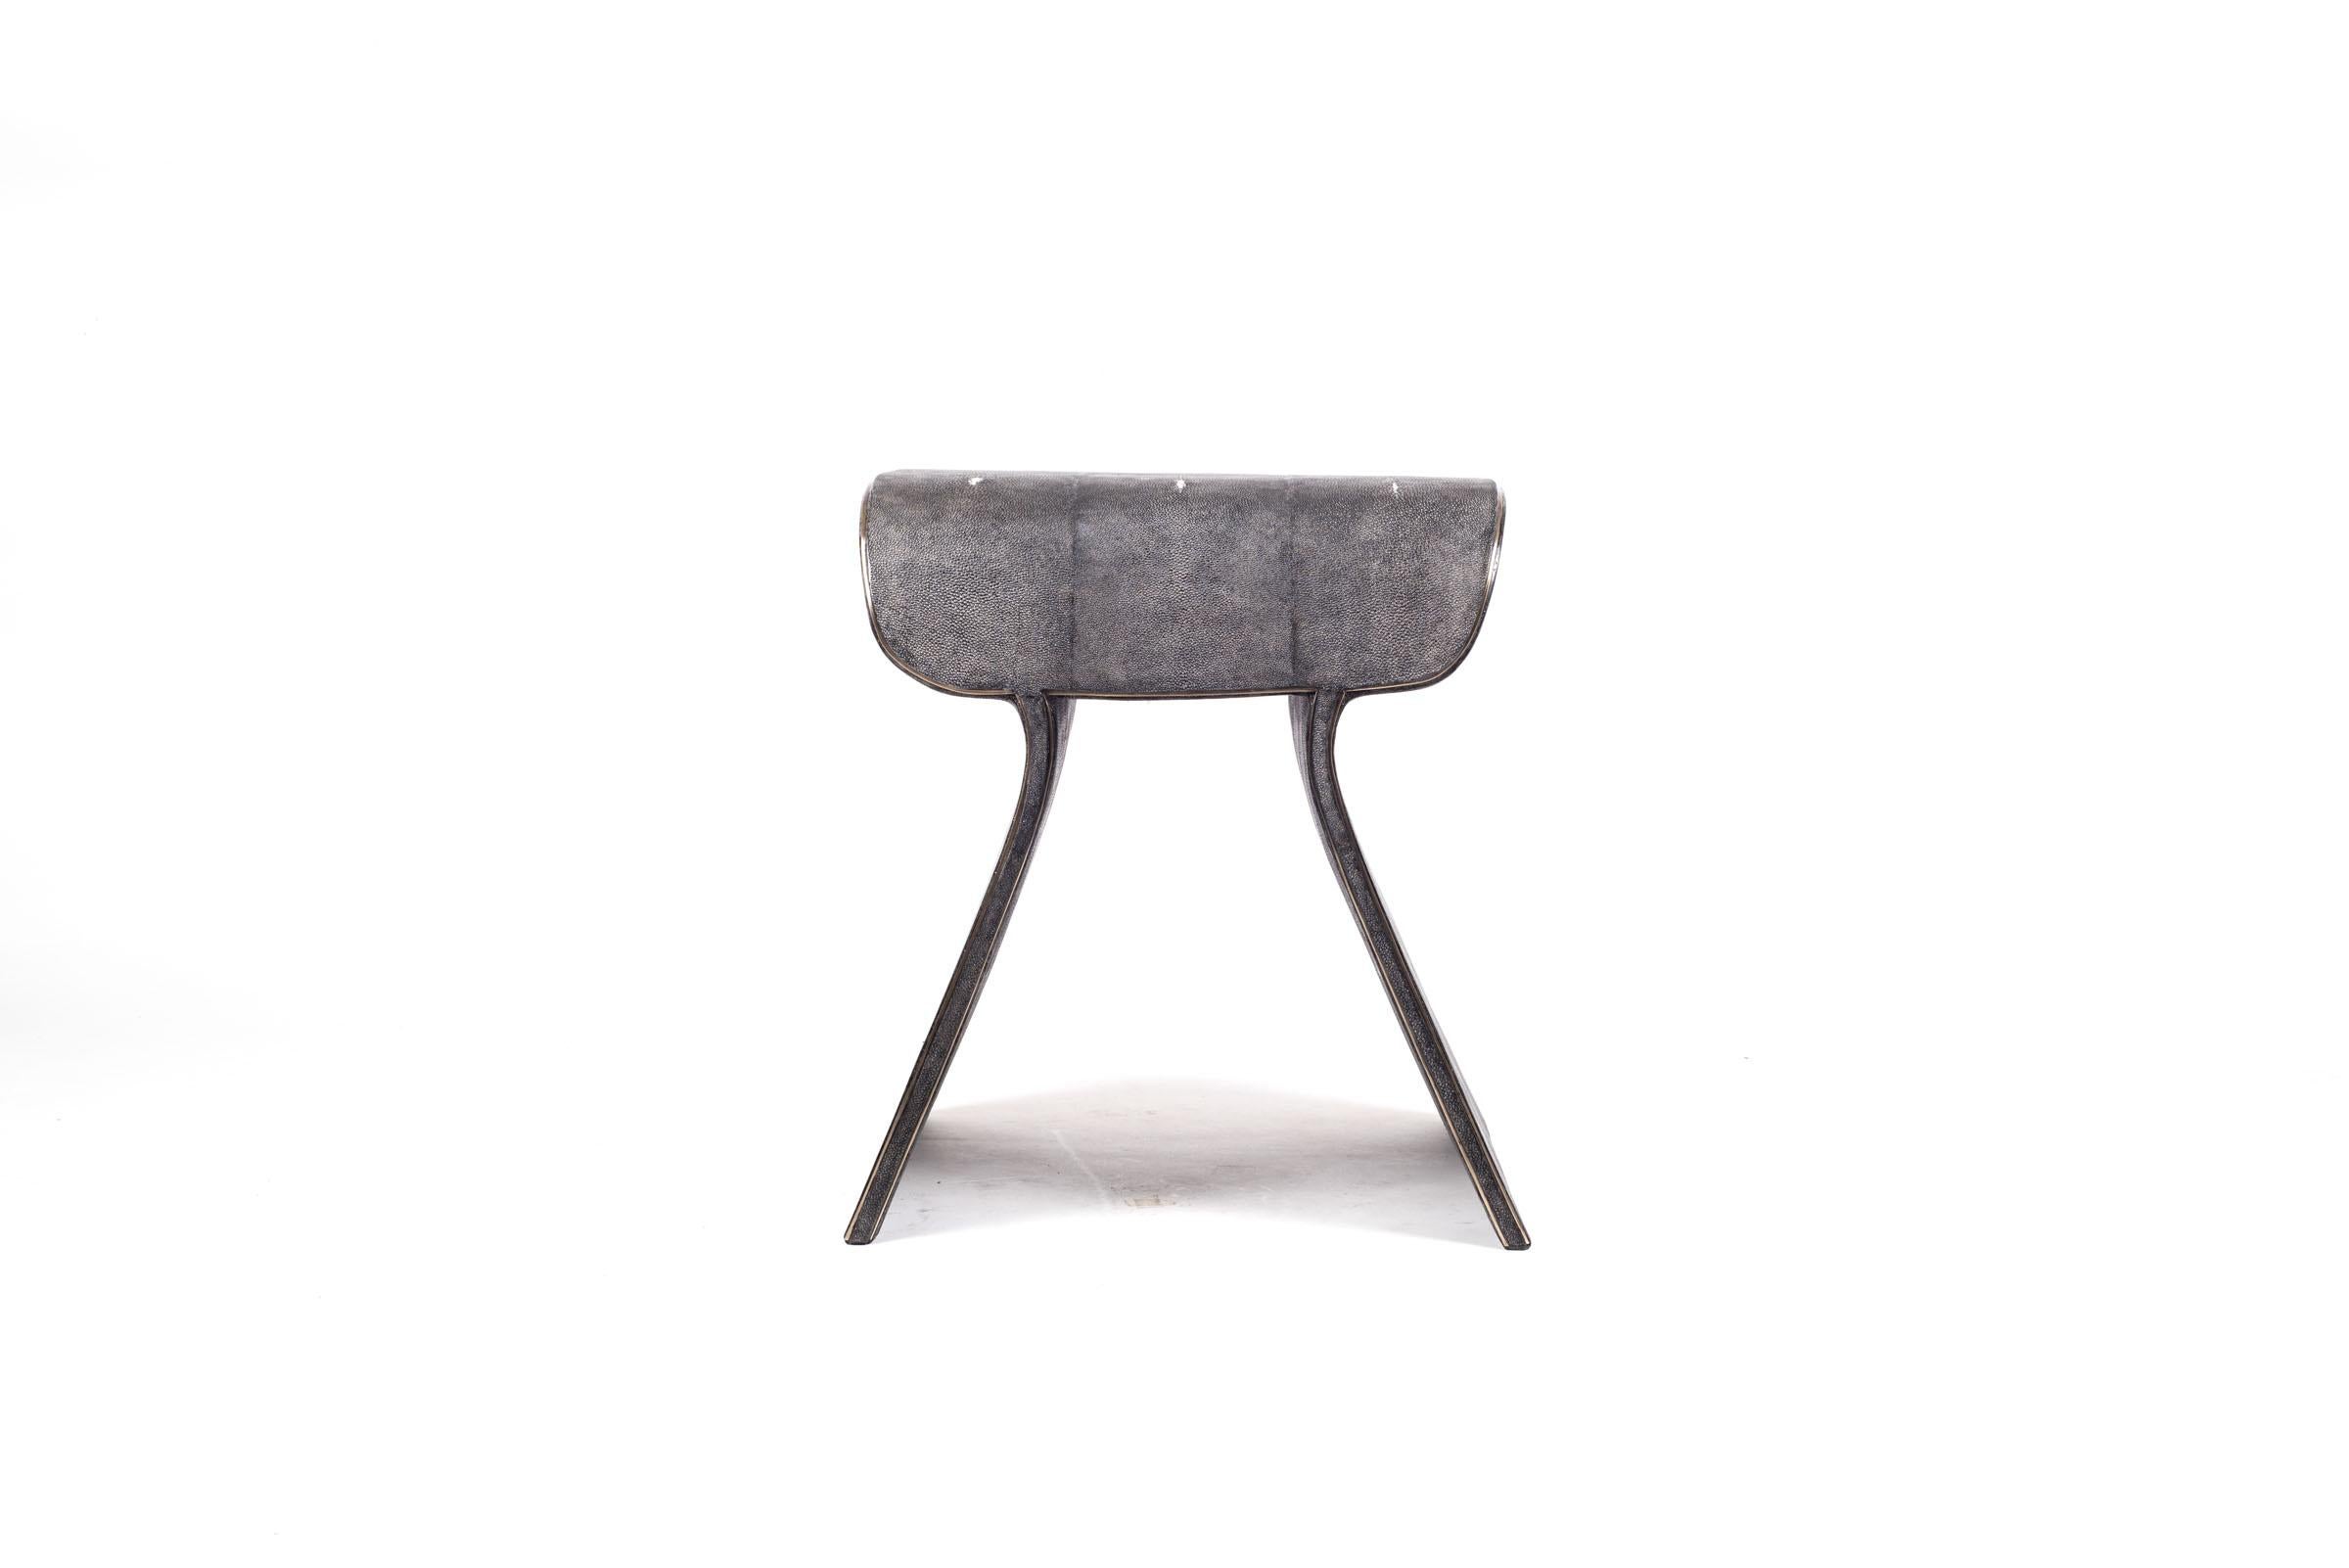 The dandy stool in coal black shagreen is a chic seating piece for any space. The clean lines make it an adaptable piece and the discreet bronze-patina brass indentation details add another luxurious element. Available with metal on the side, image